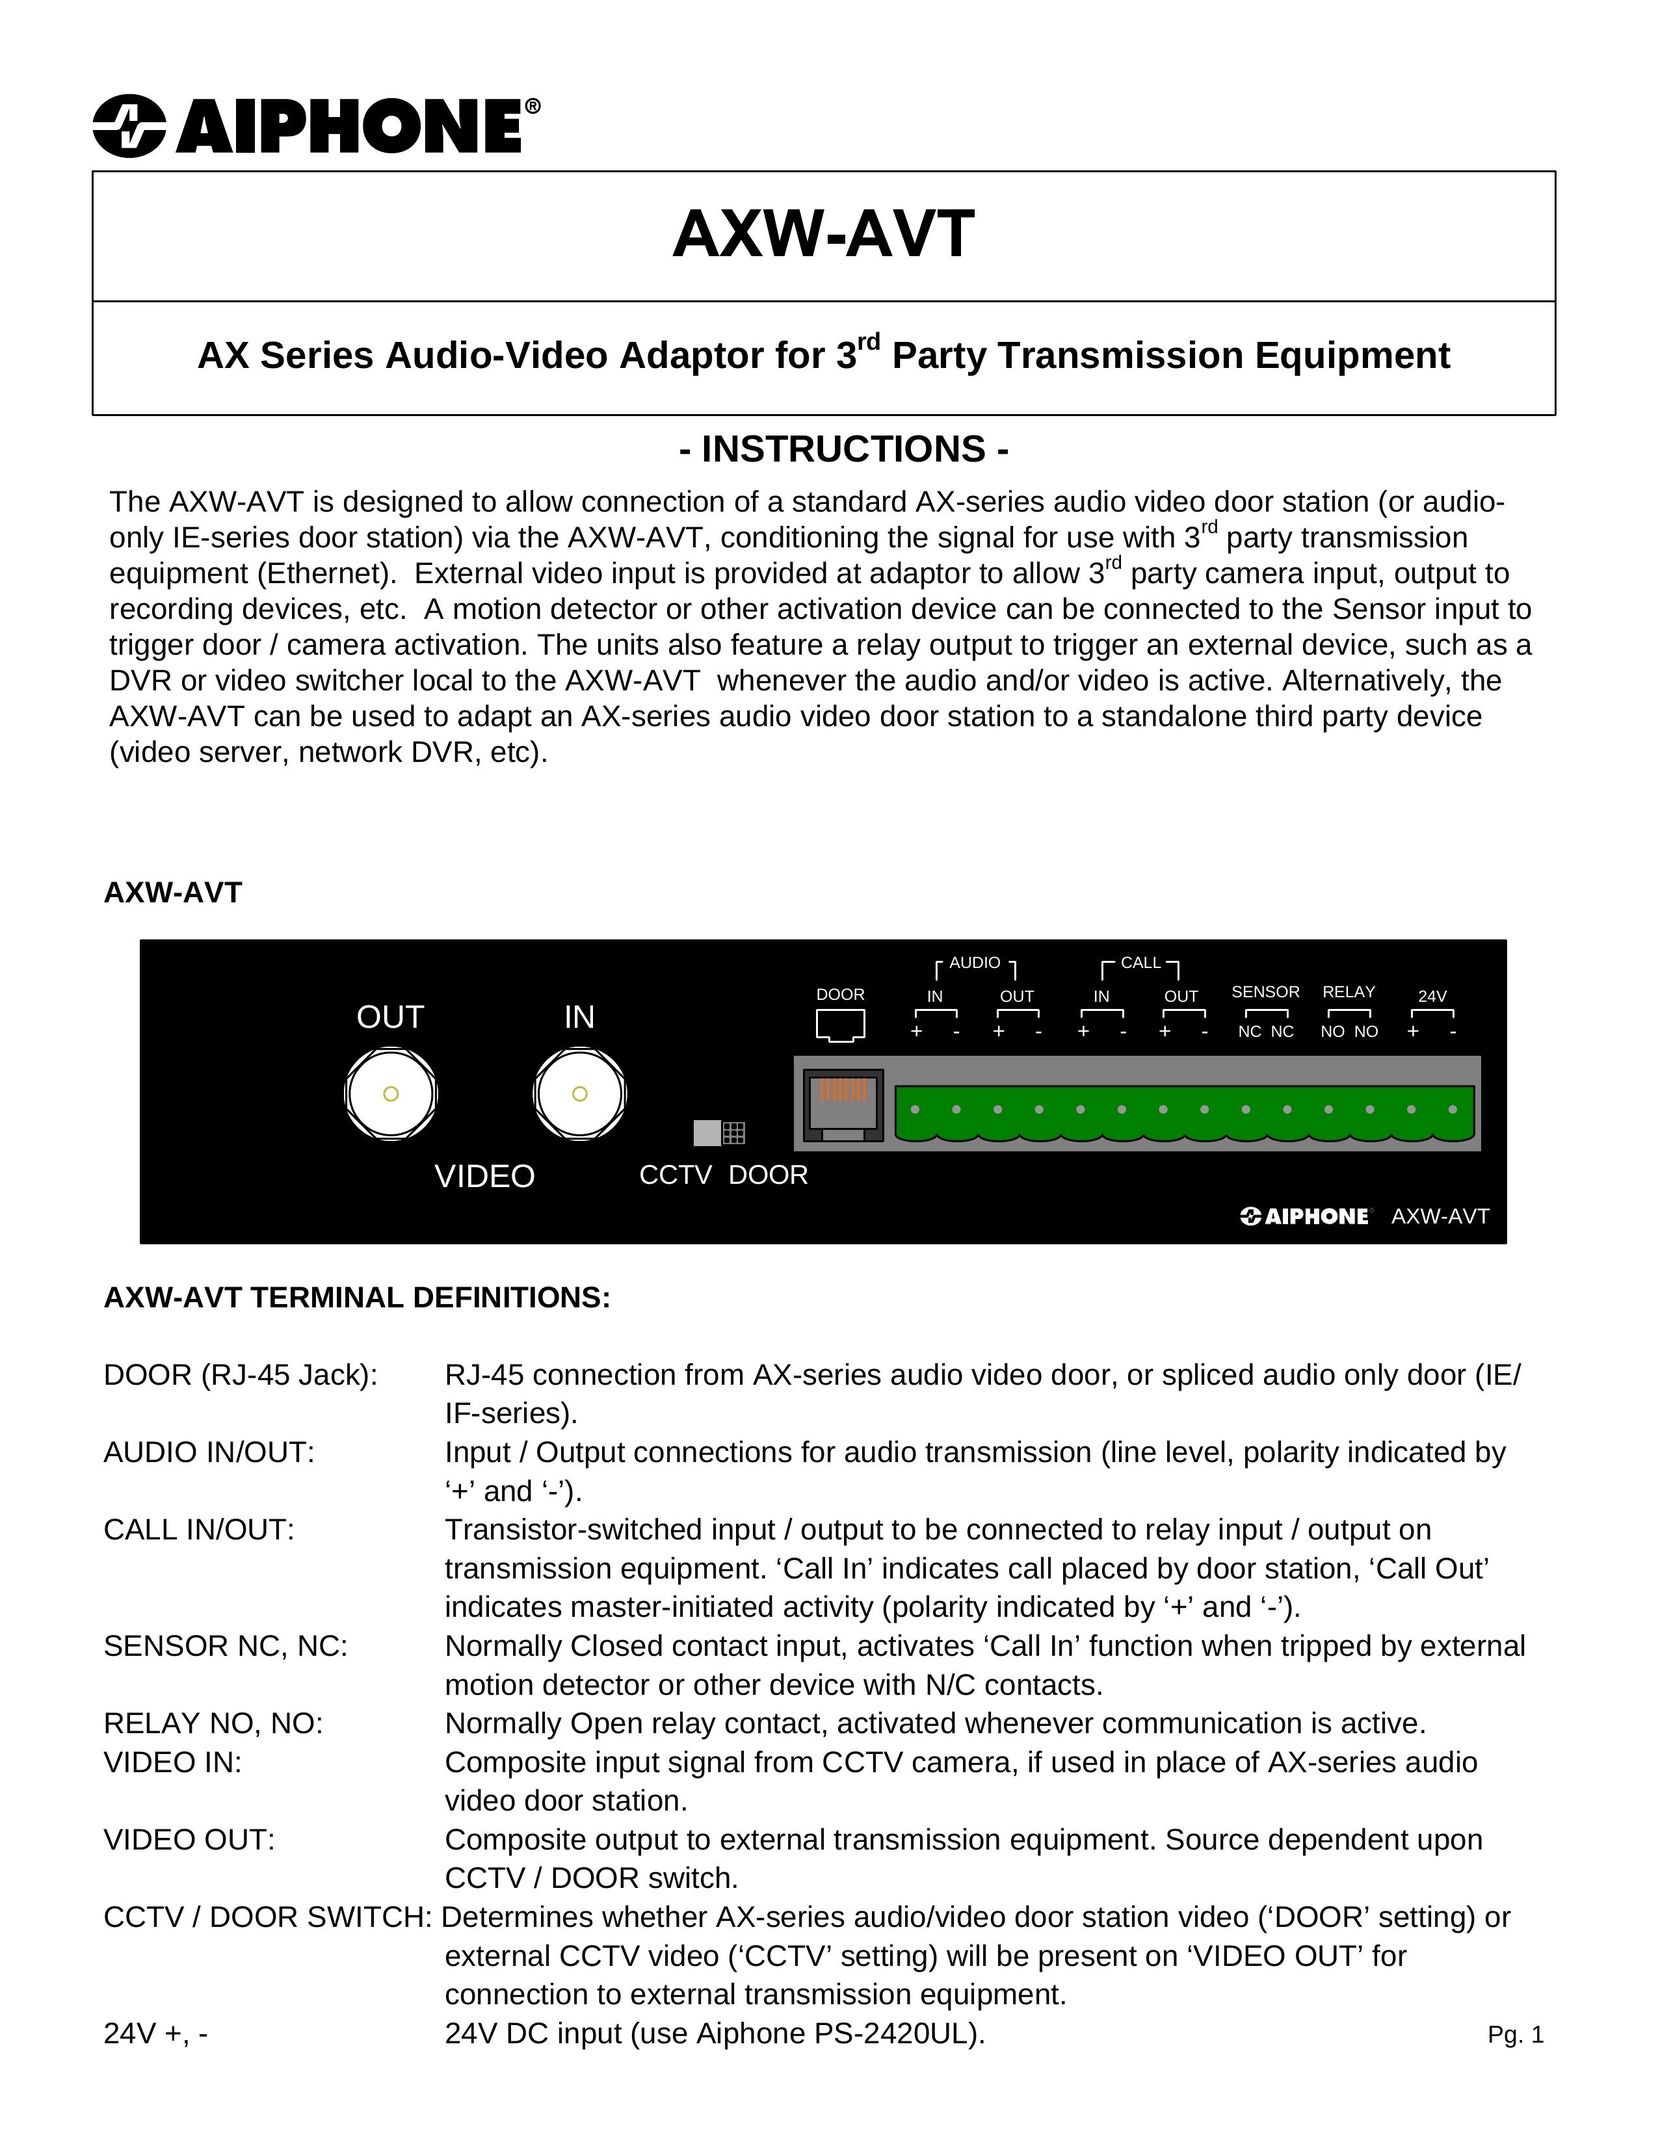 Aiphone AXW-AVT TV Cables User Manual